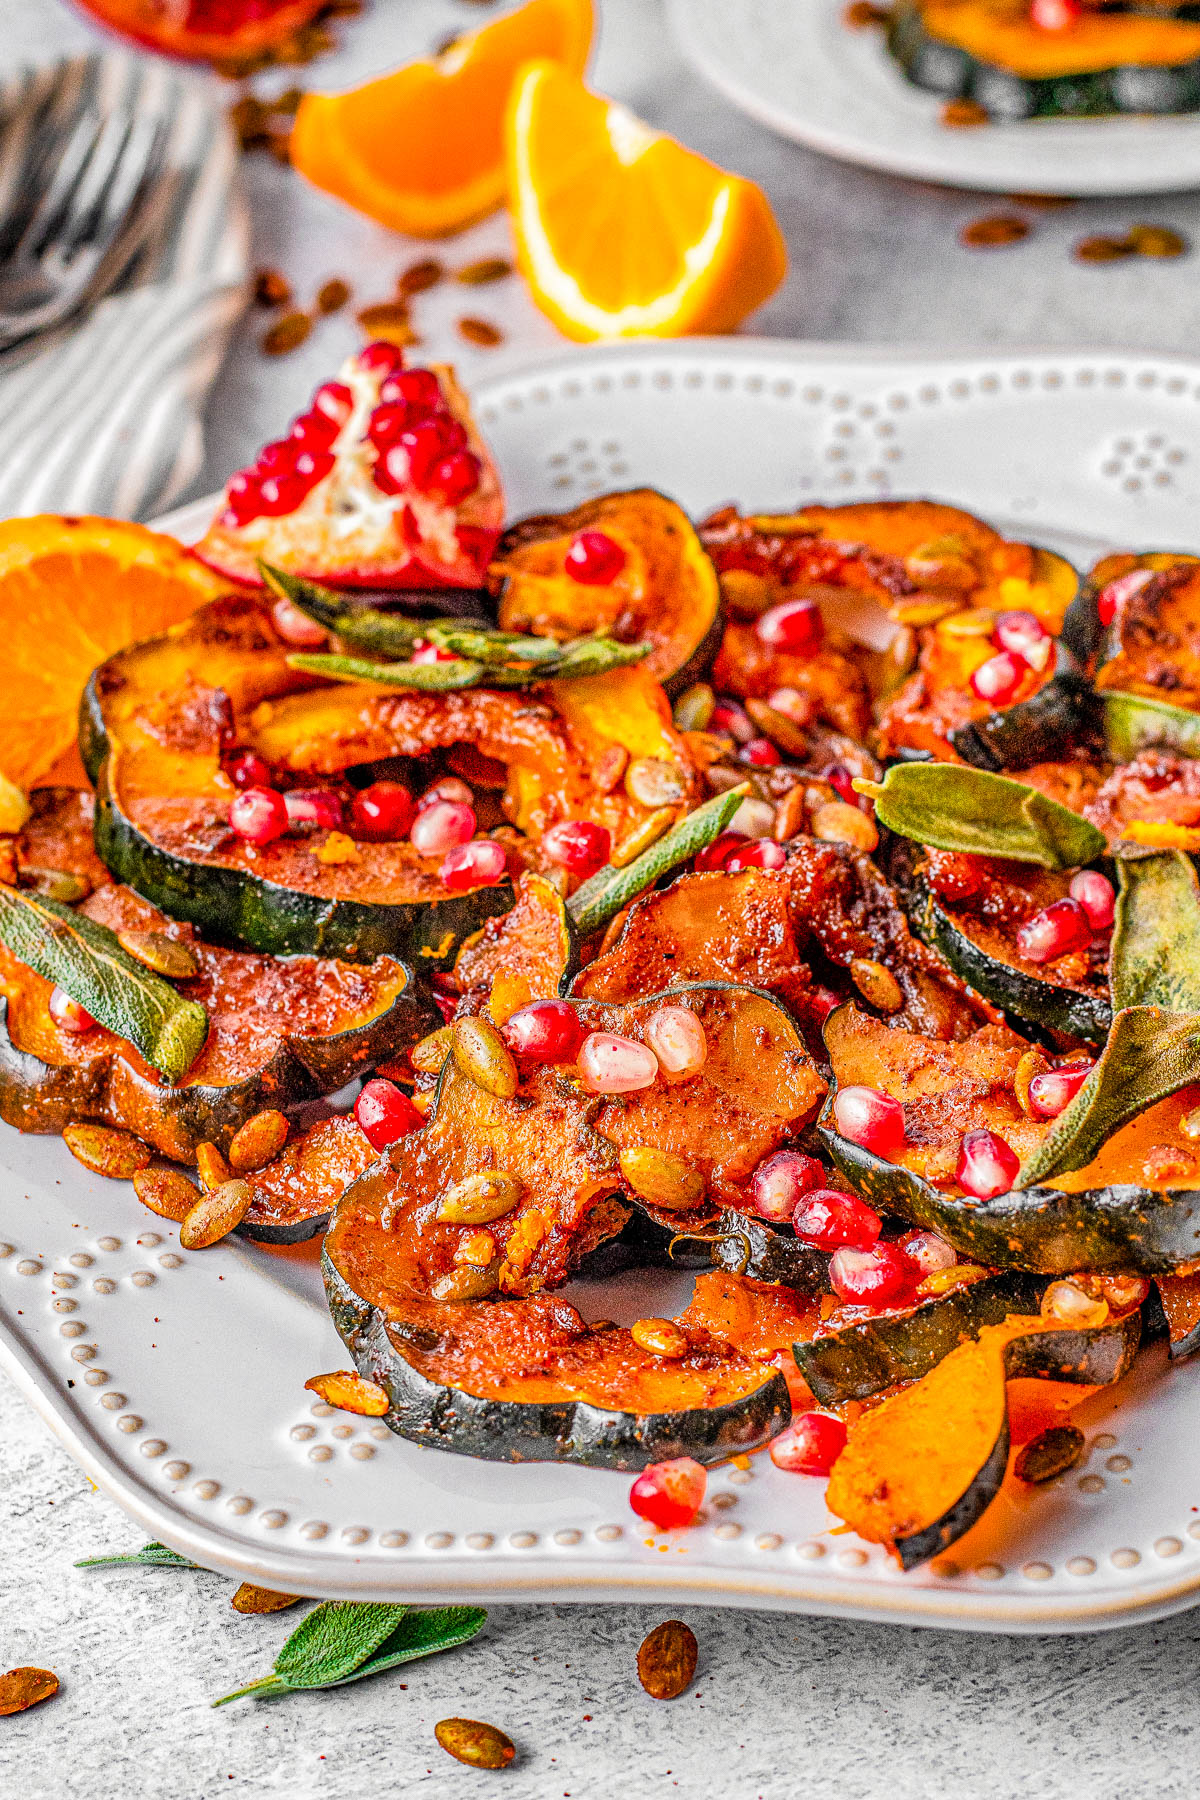 Sweet and Spicy Acorn Squash - Tender oven-roasted acorn squash is made extra fabulous with a sweet and spicy orange-infused butter sauce. It's topped with toasted sage leaves, pumpkin seeds, pomegranate arils, and a touch of orange zest for a festive touch. An EASY fall-flavored side dish that's ready in 20 minutes! Perfect for weeknight dinners or put it on your Thanksgiving or Christmas menus! 